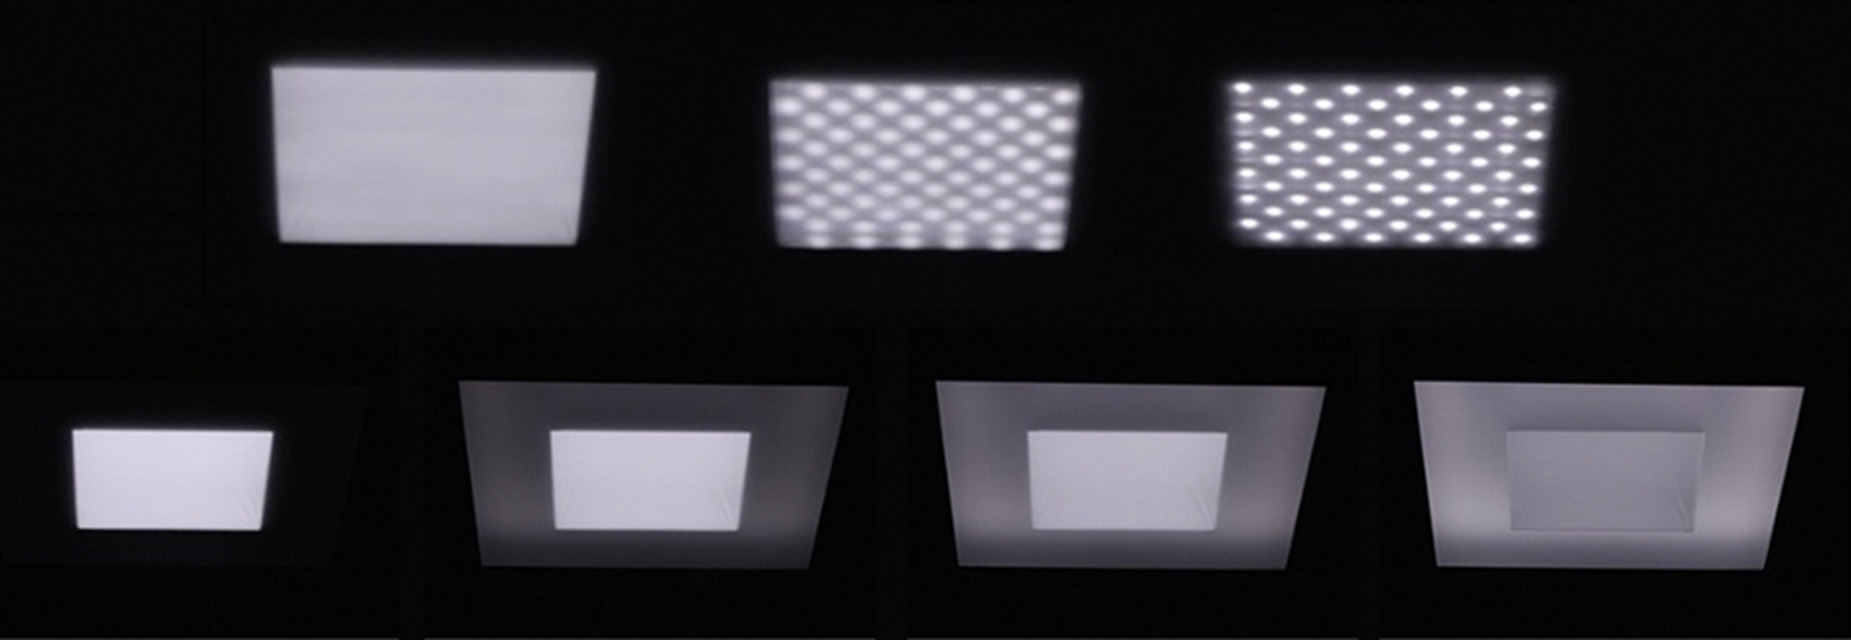 The different lighting patterns that were used in the investigation